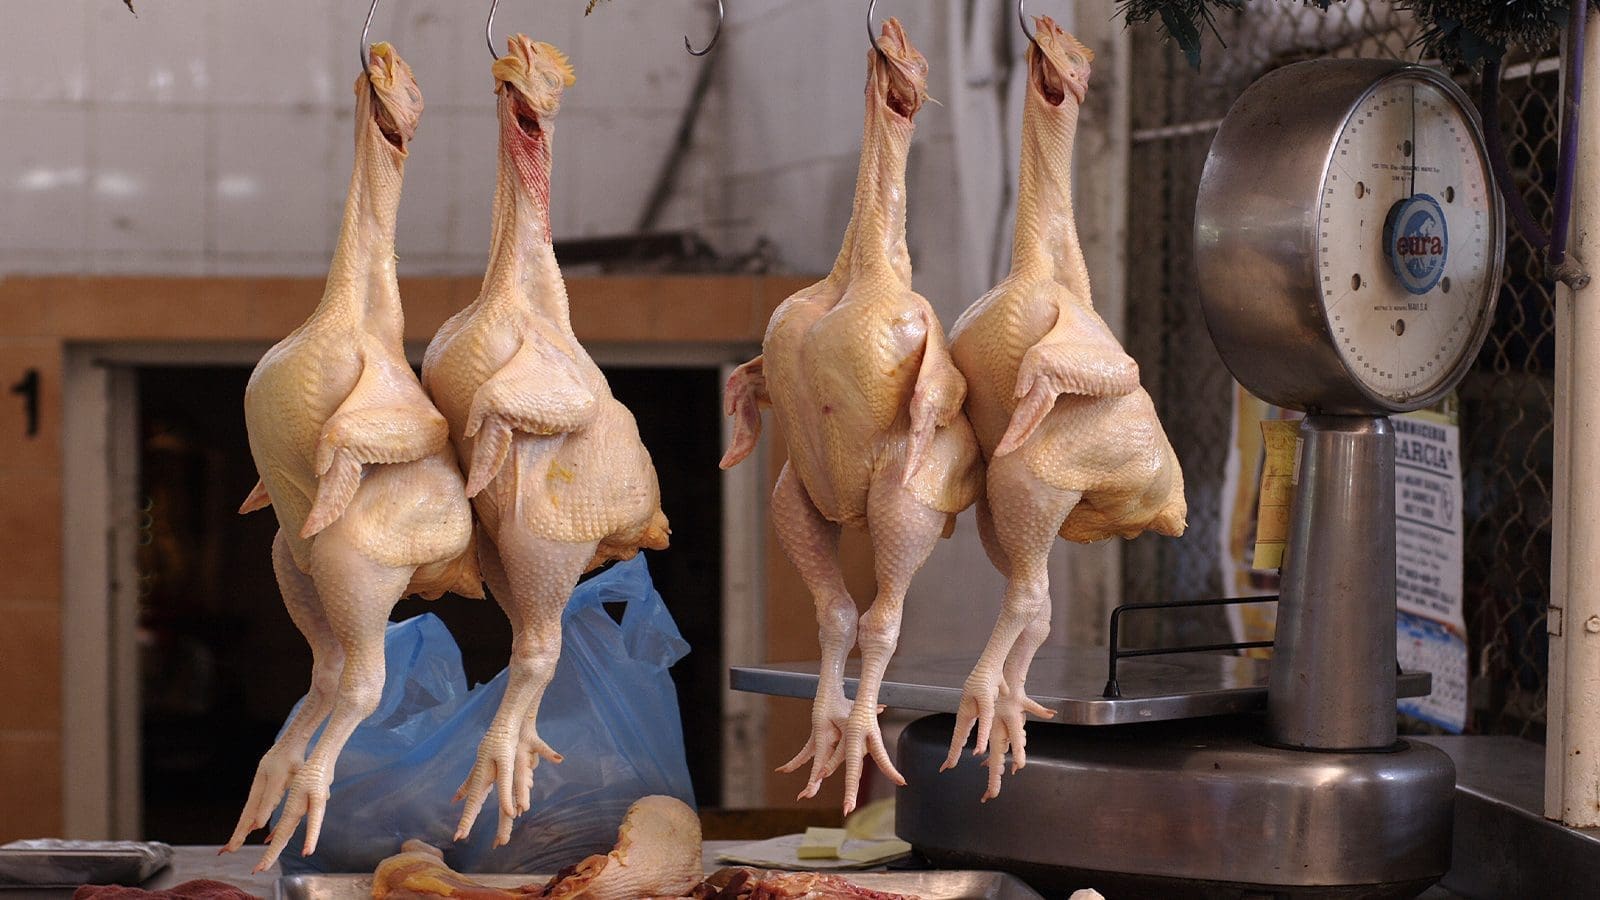 Poultry Association of Uganda denounces alleged chicken laced with ARVs, vows ethical standards